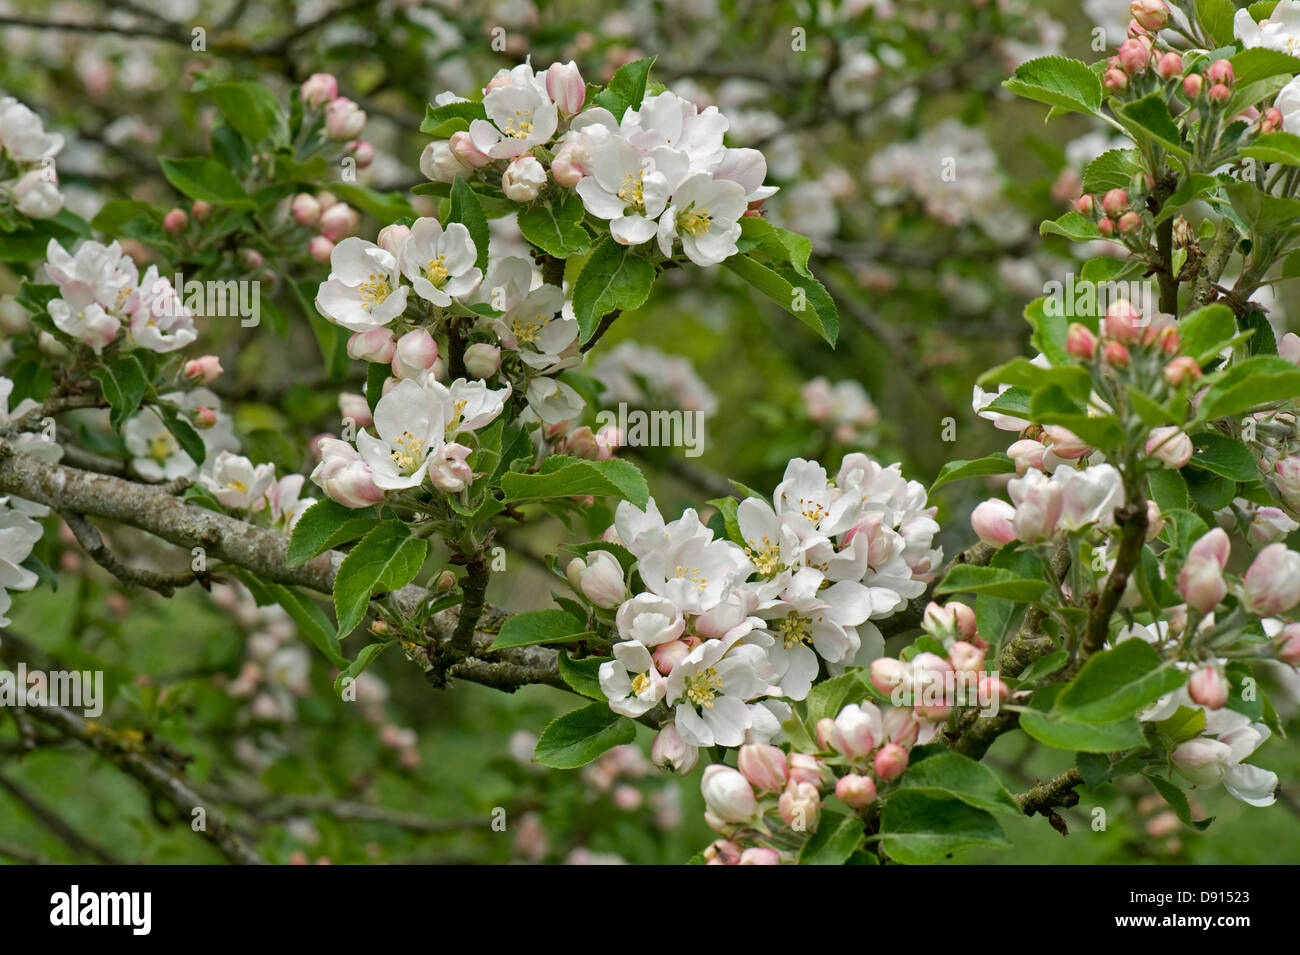 Blossom on a Discovery apple tree in a spring garden Stock Photo